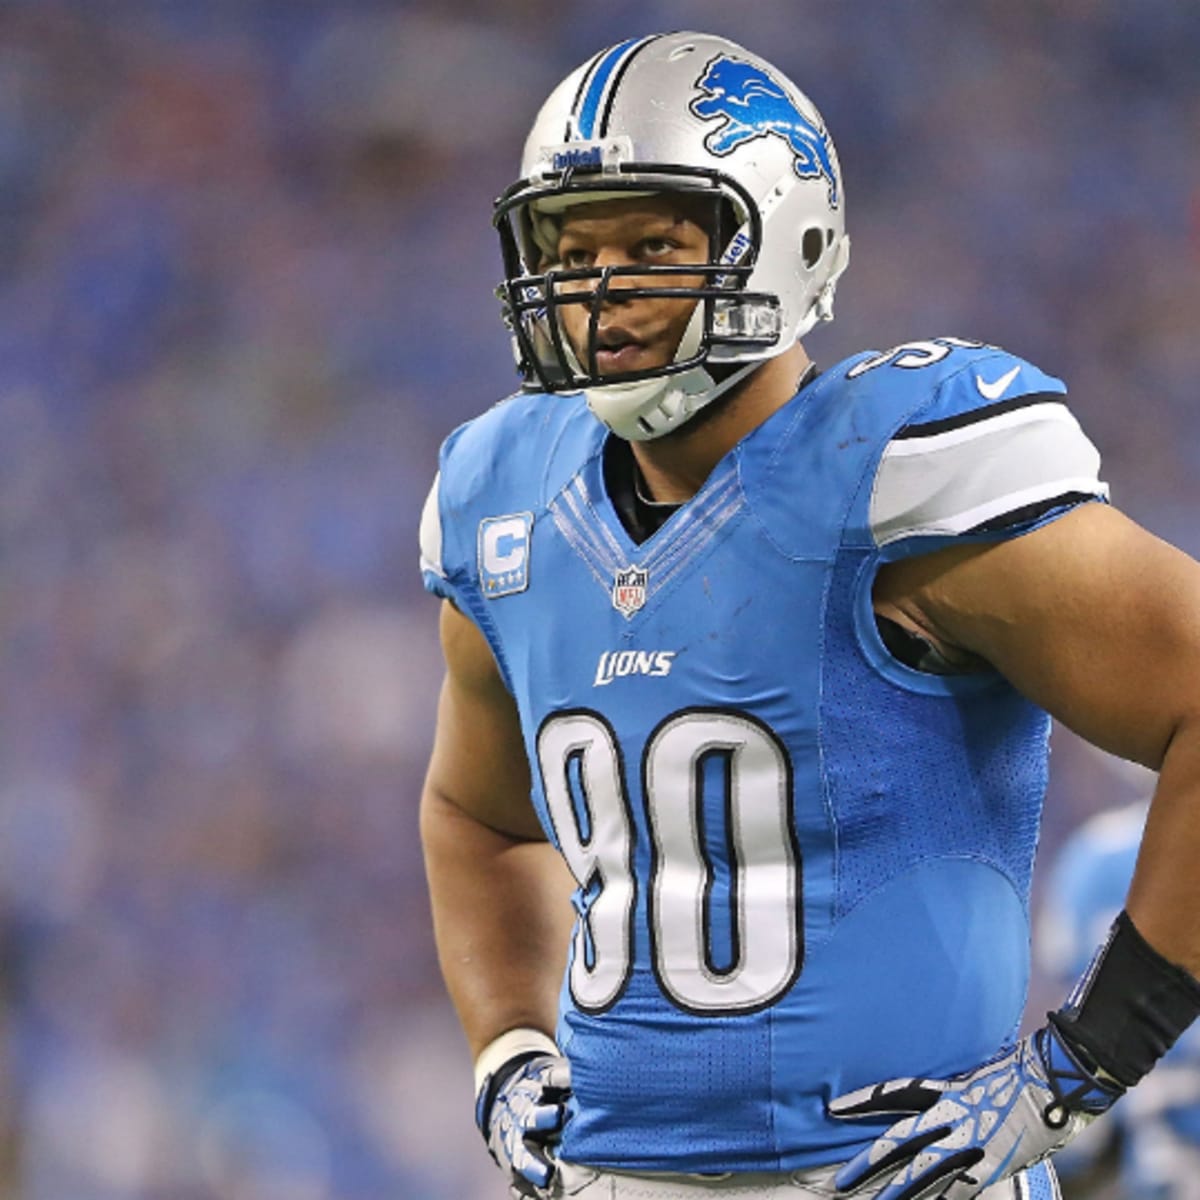 Detroit Lions defensive tackle Ndamukong Suh: A history in discipline